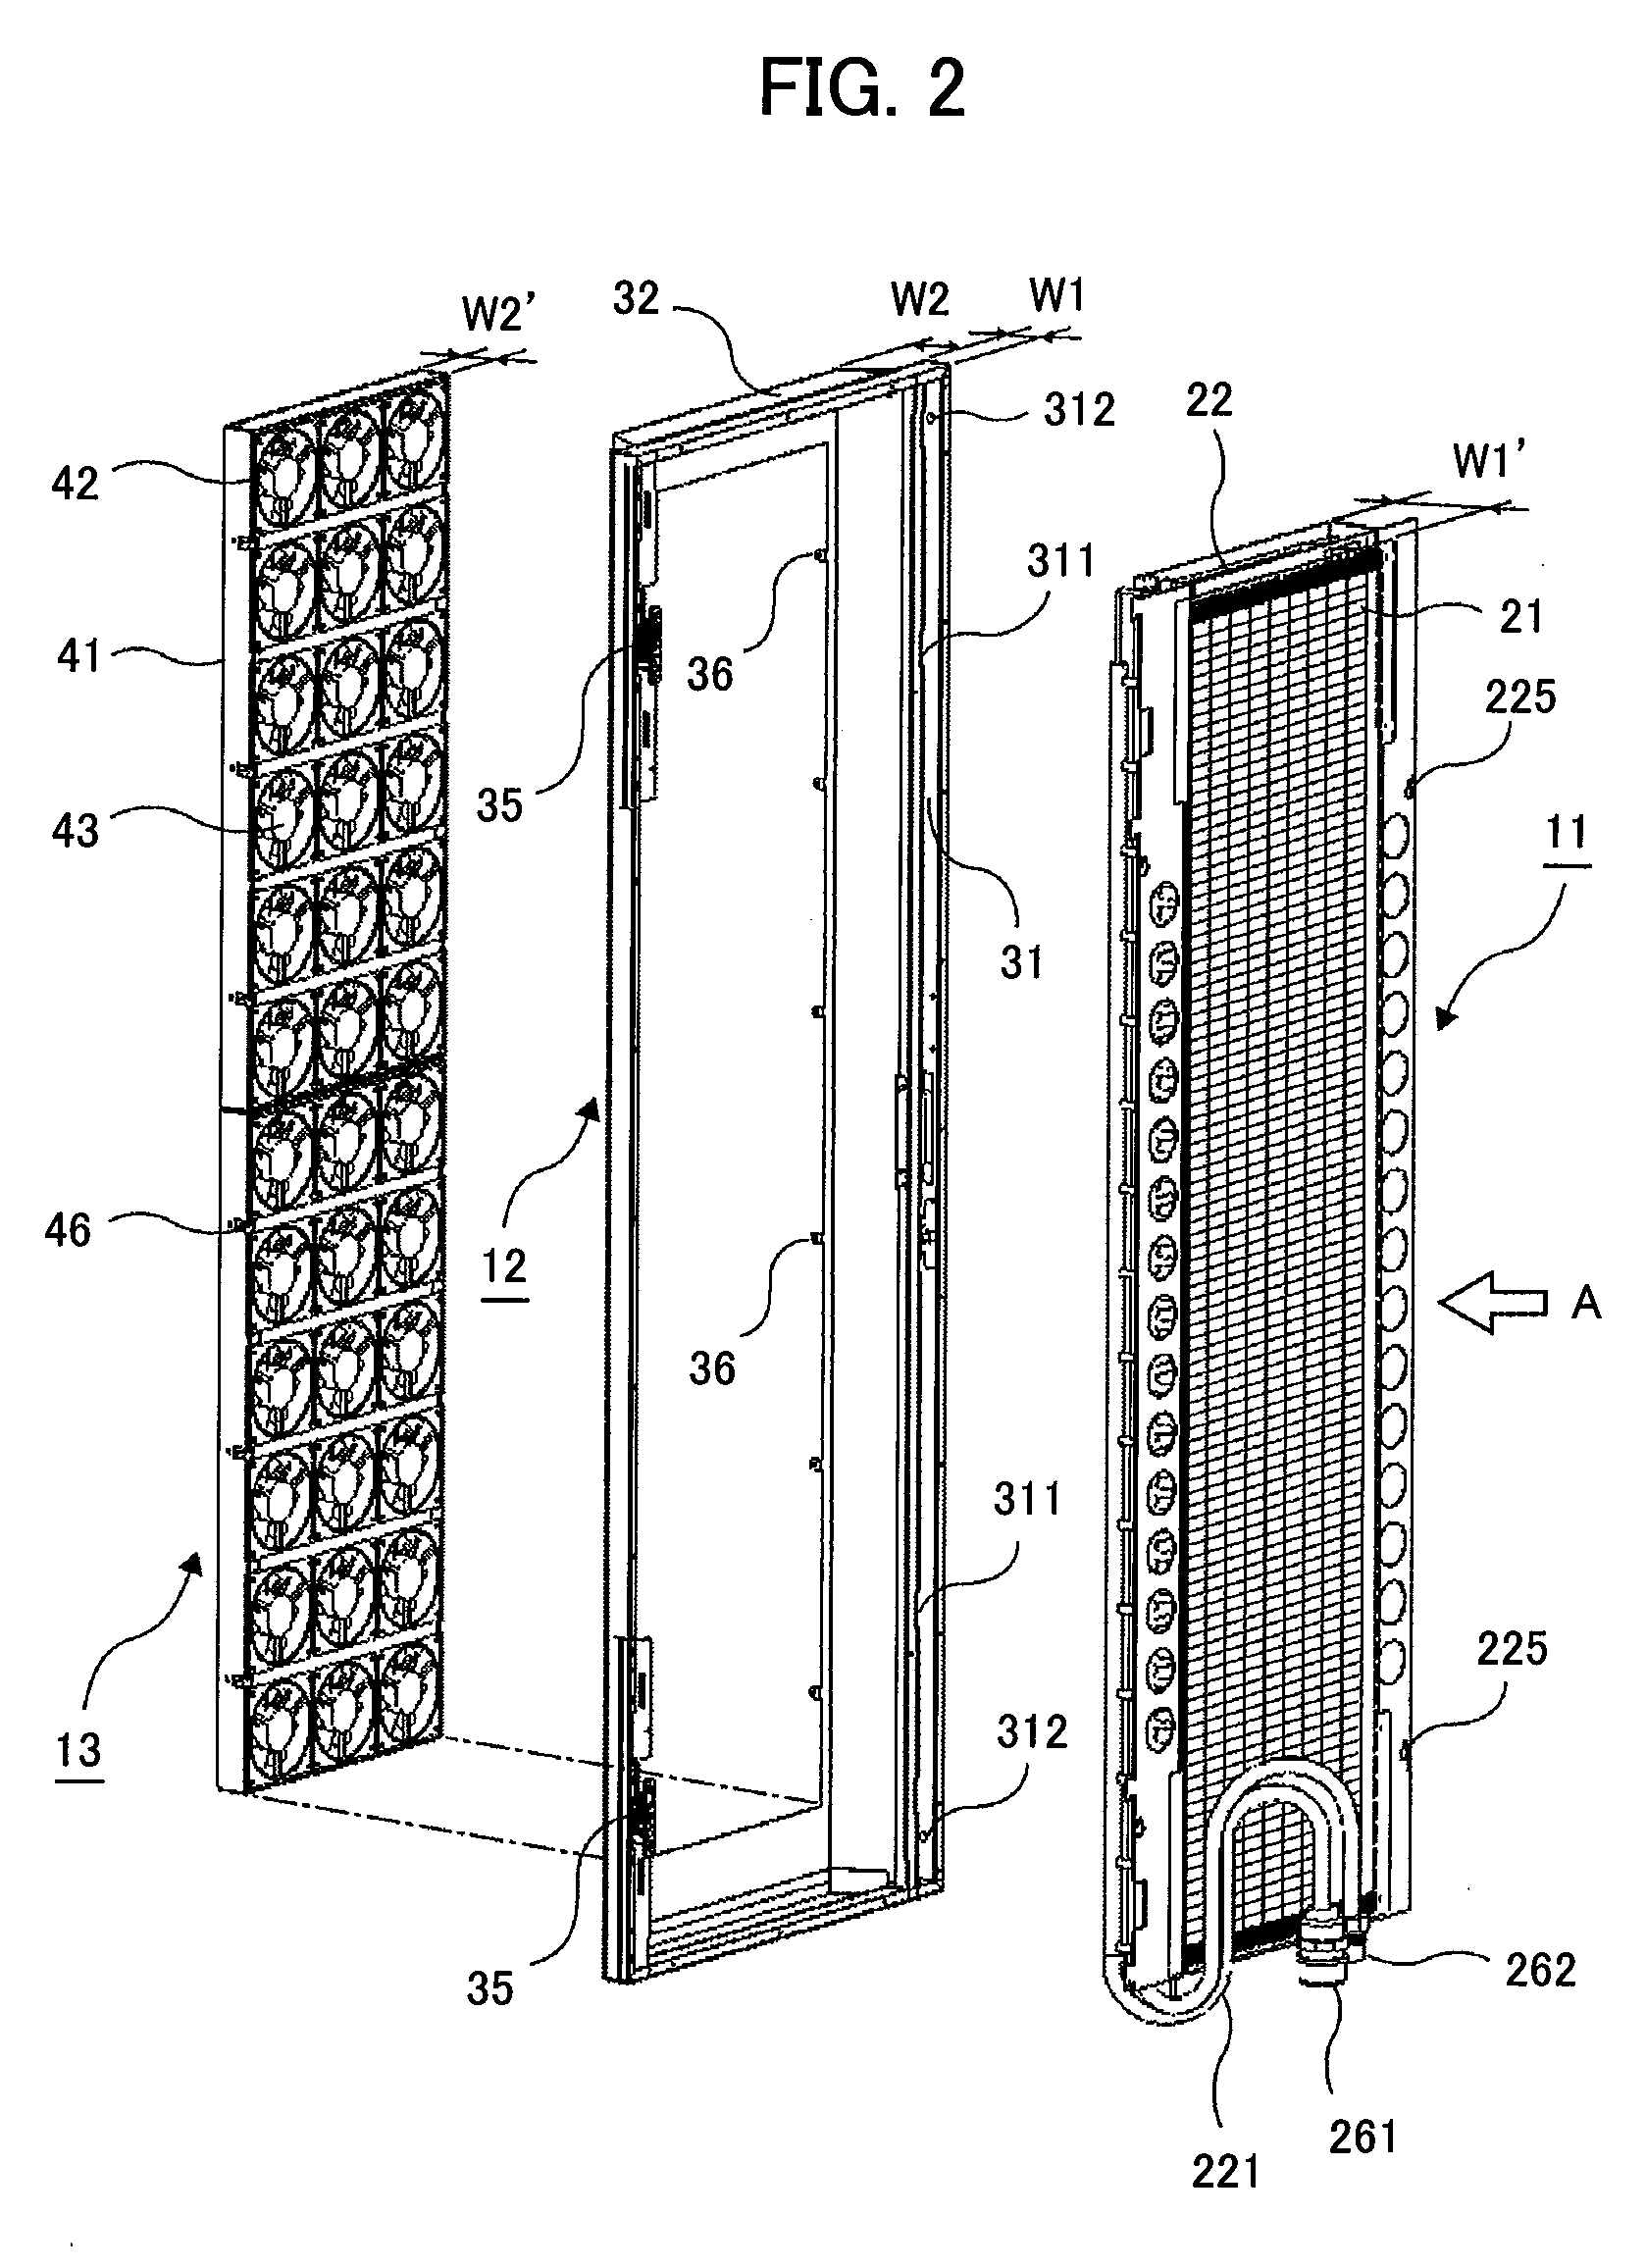 Cooling unit, electronic apparatus rack, cooling system, and construction method thereof